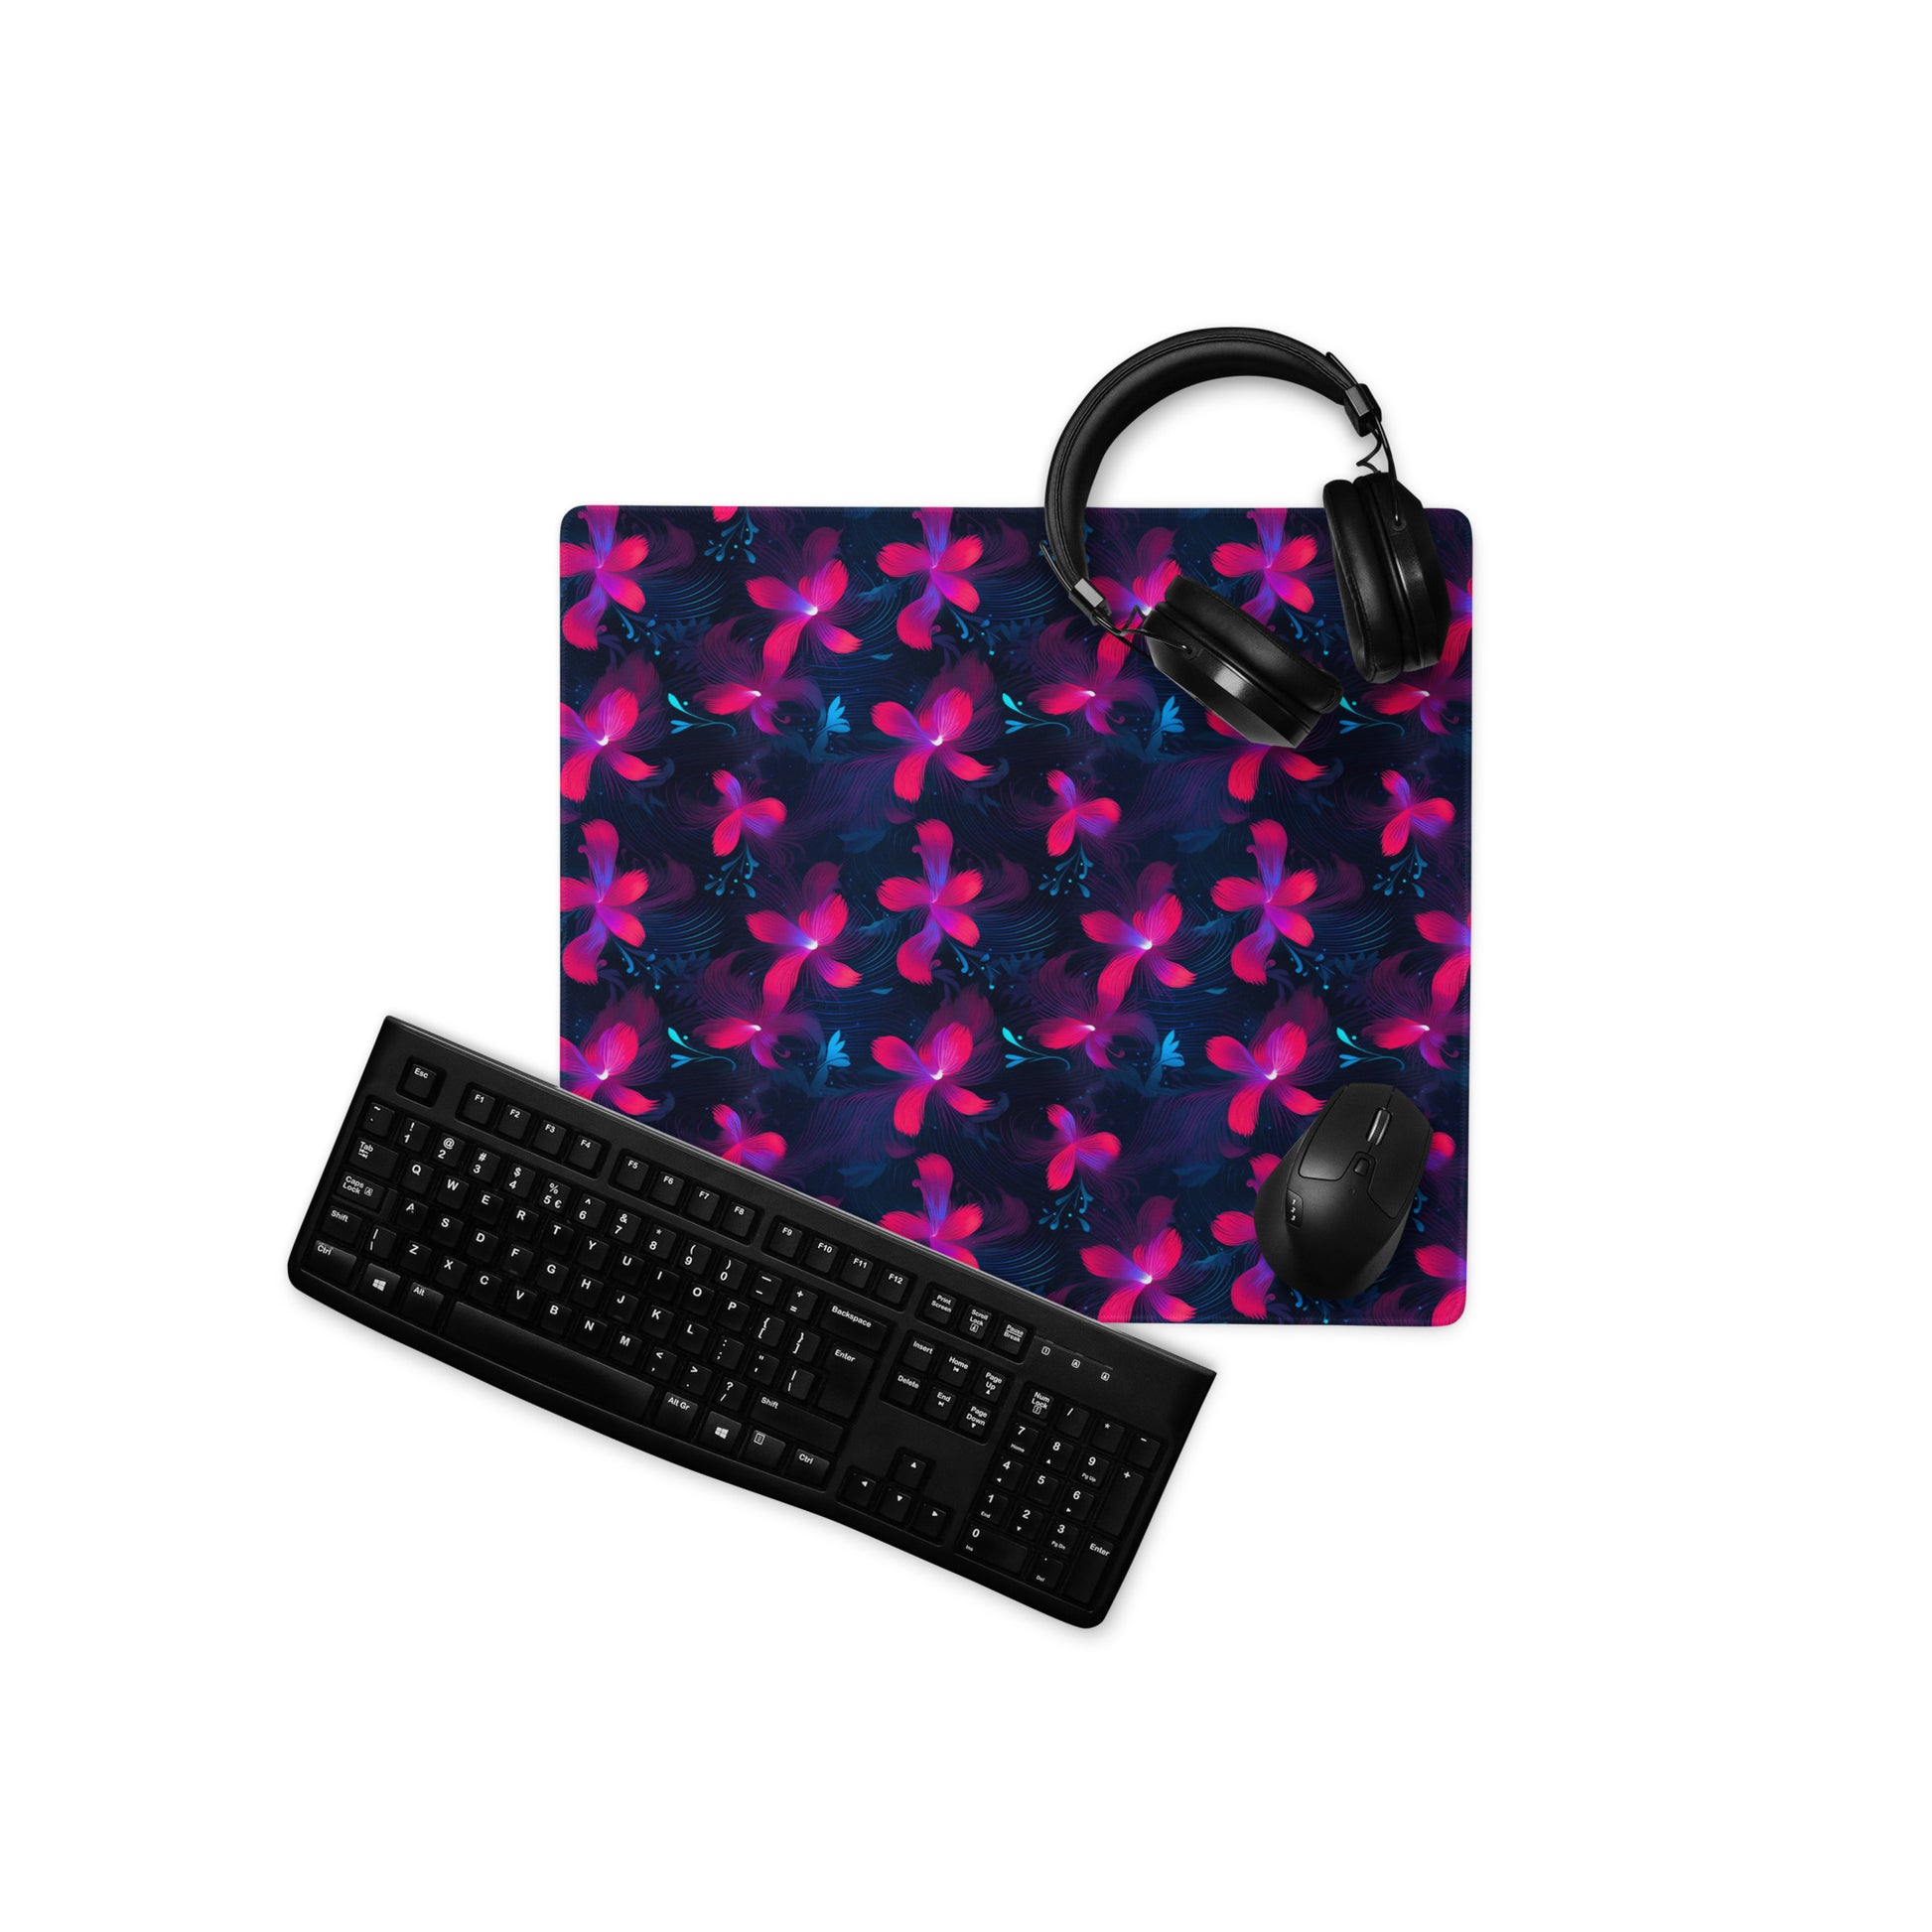 A 18" x 16" desk pad with neon pink and blue floral pattern. With a keyboard, mouse, and headphones sitting on it.